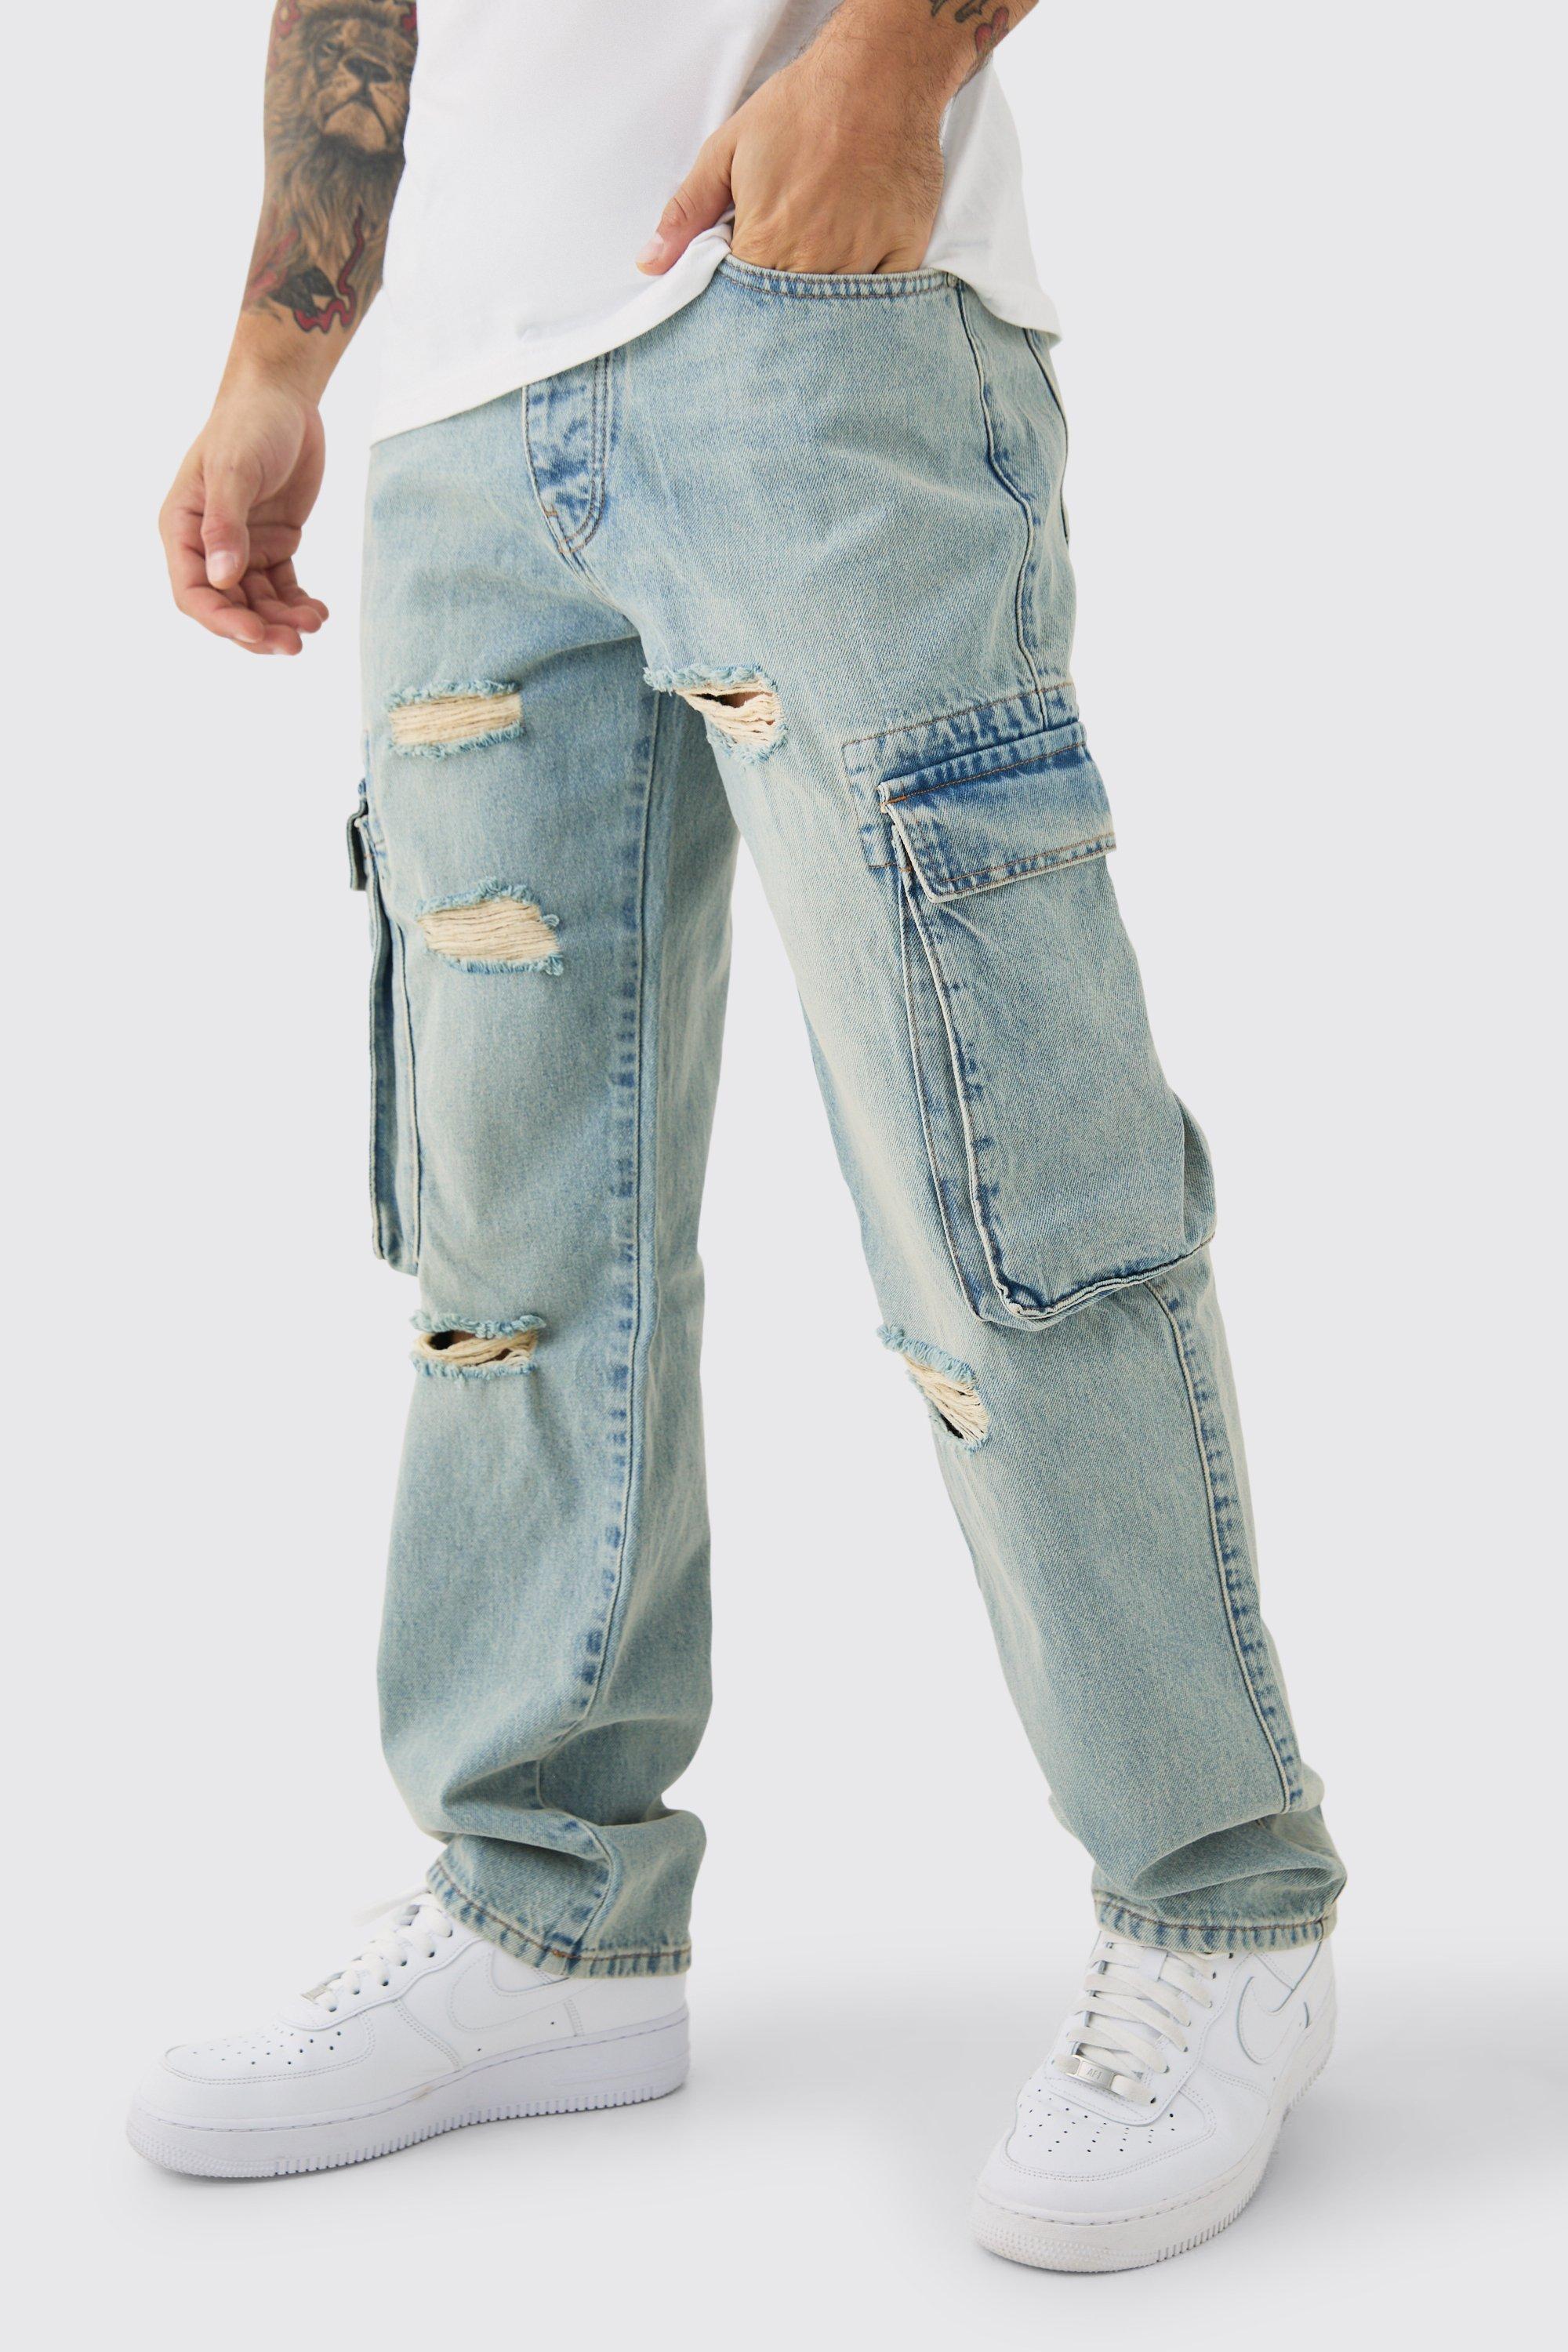 Image of Relaxed Rigid Ripped Cargo Pocked Denim Jean In Light Blue, Azzurro